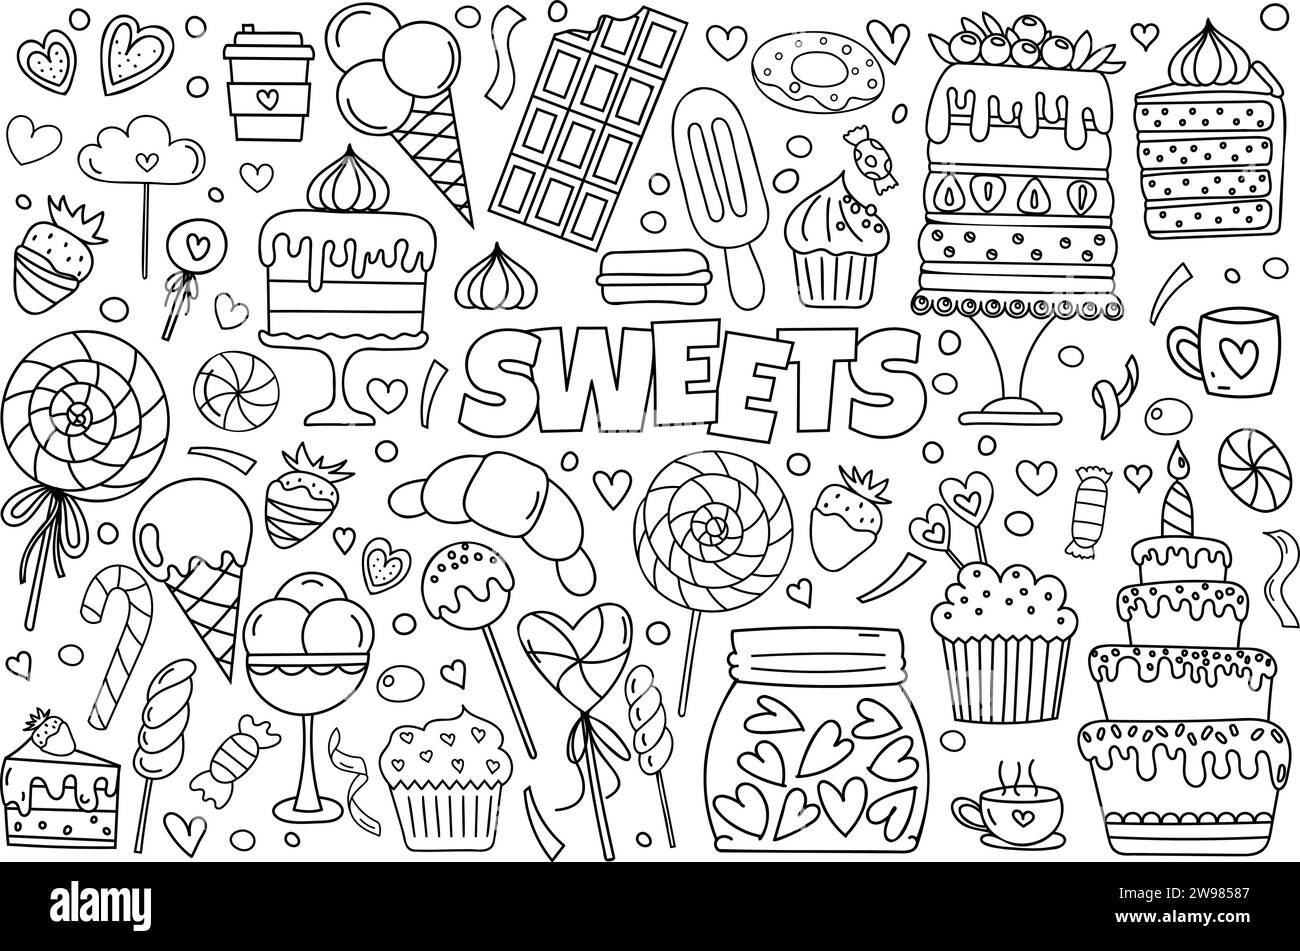 Hand-Drawn Vector Doodle Set Features A Stress-Relief Coloring Page Theme Of Sweets, Including An Array Of Cakes, Candies, Cupcakes, Ice Cream, And More, Making It A Cute Coloring Book Stock Vector